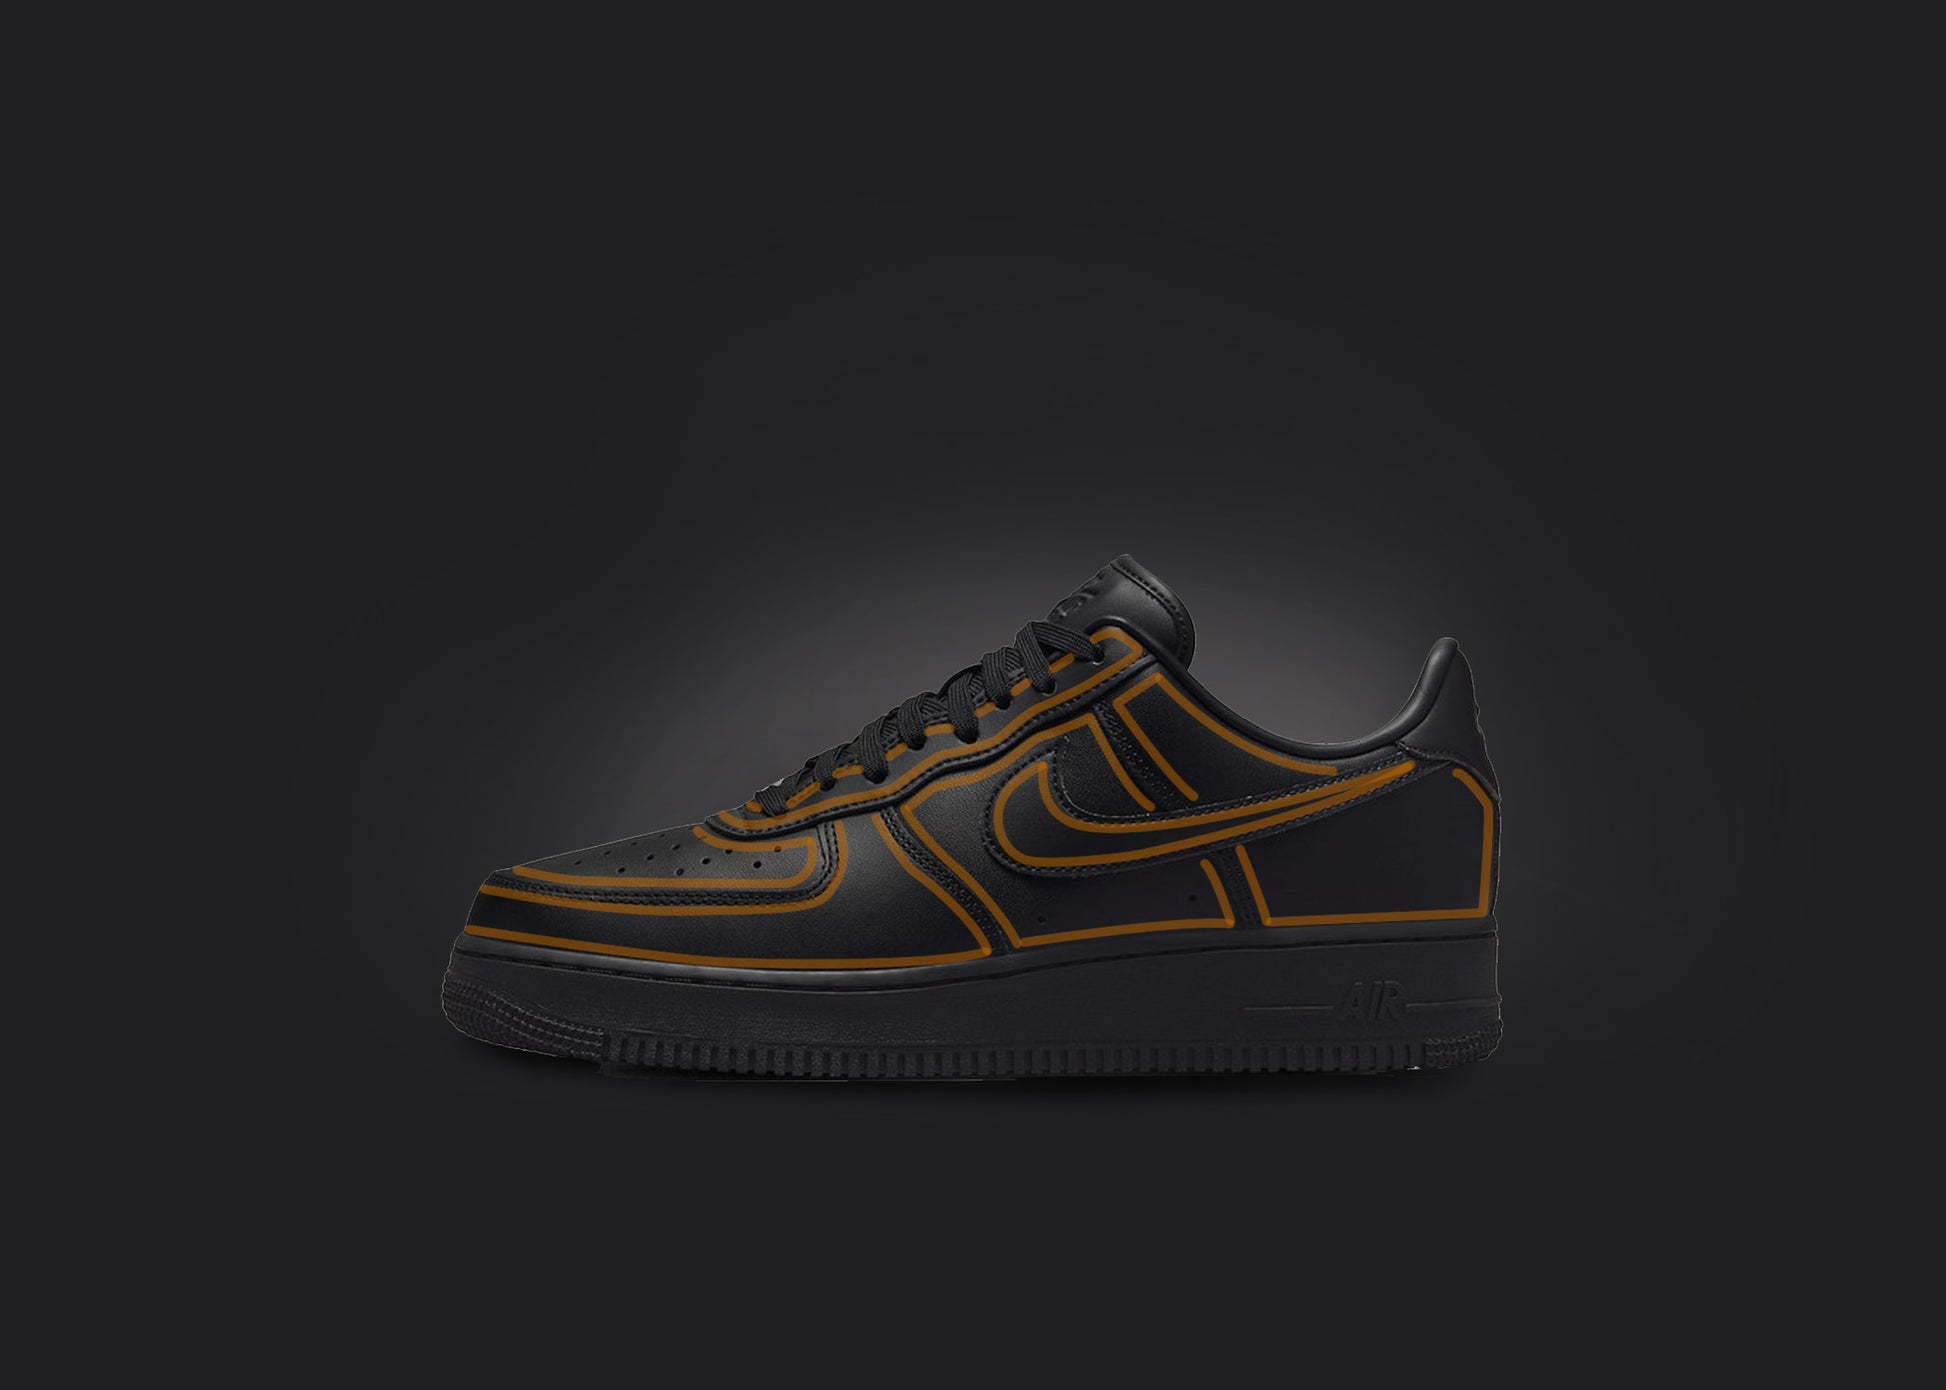 The image is featuring a custom black Air force 1 sneaker on a blank black background. The black nike sneaker has a orange cartoon outline design all over the sneaker. 